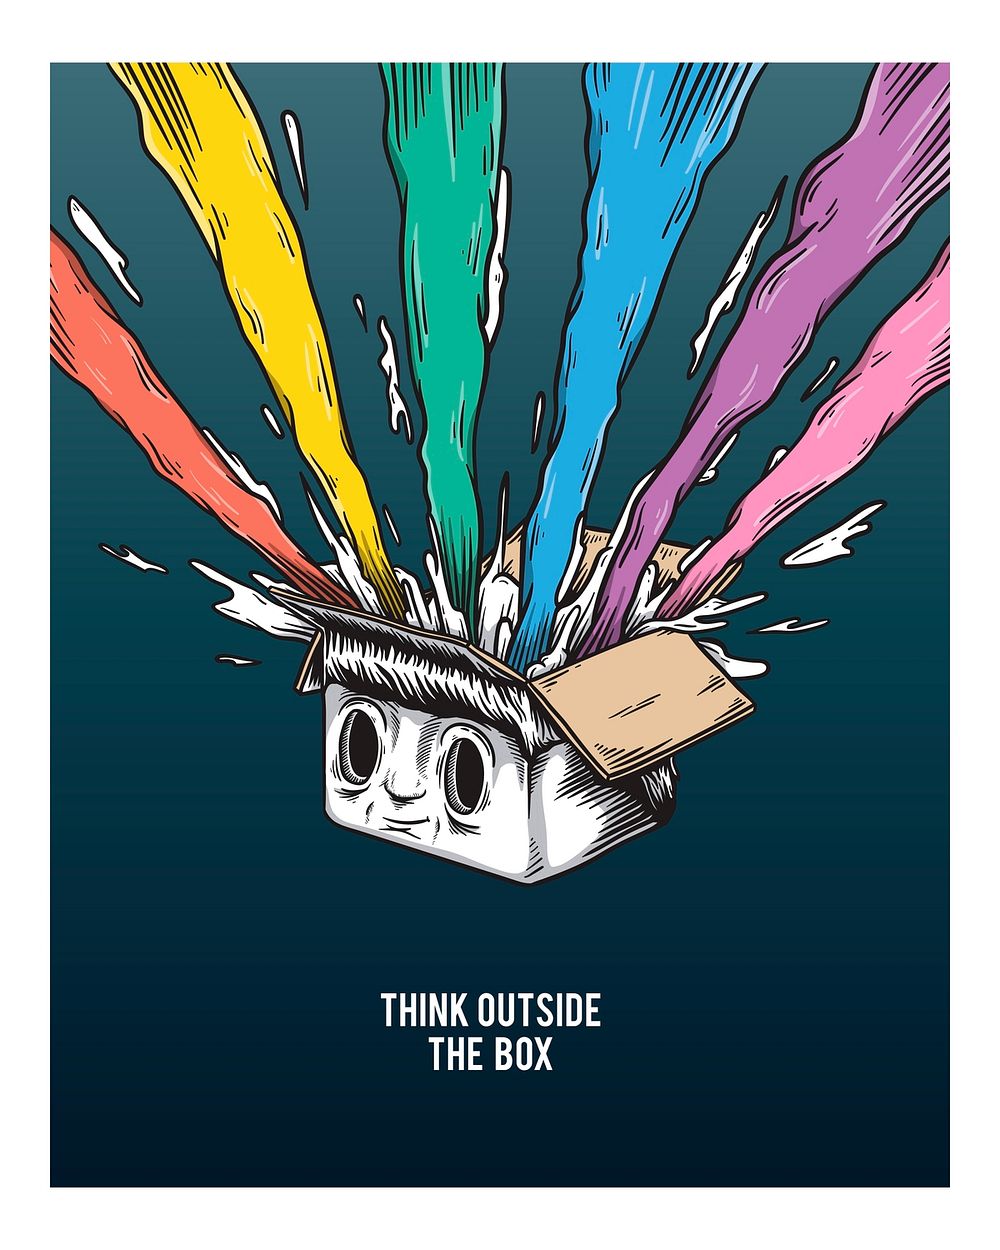 Colorful think outside the box illustration wall art print and poster.